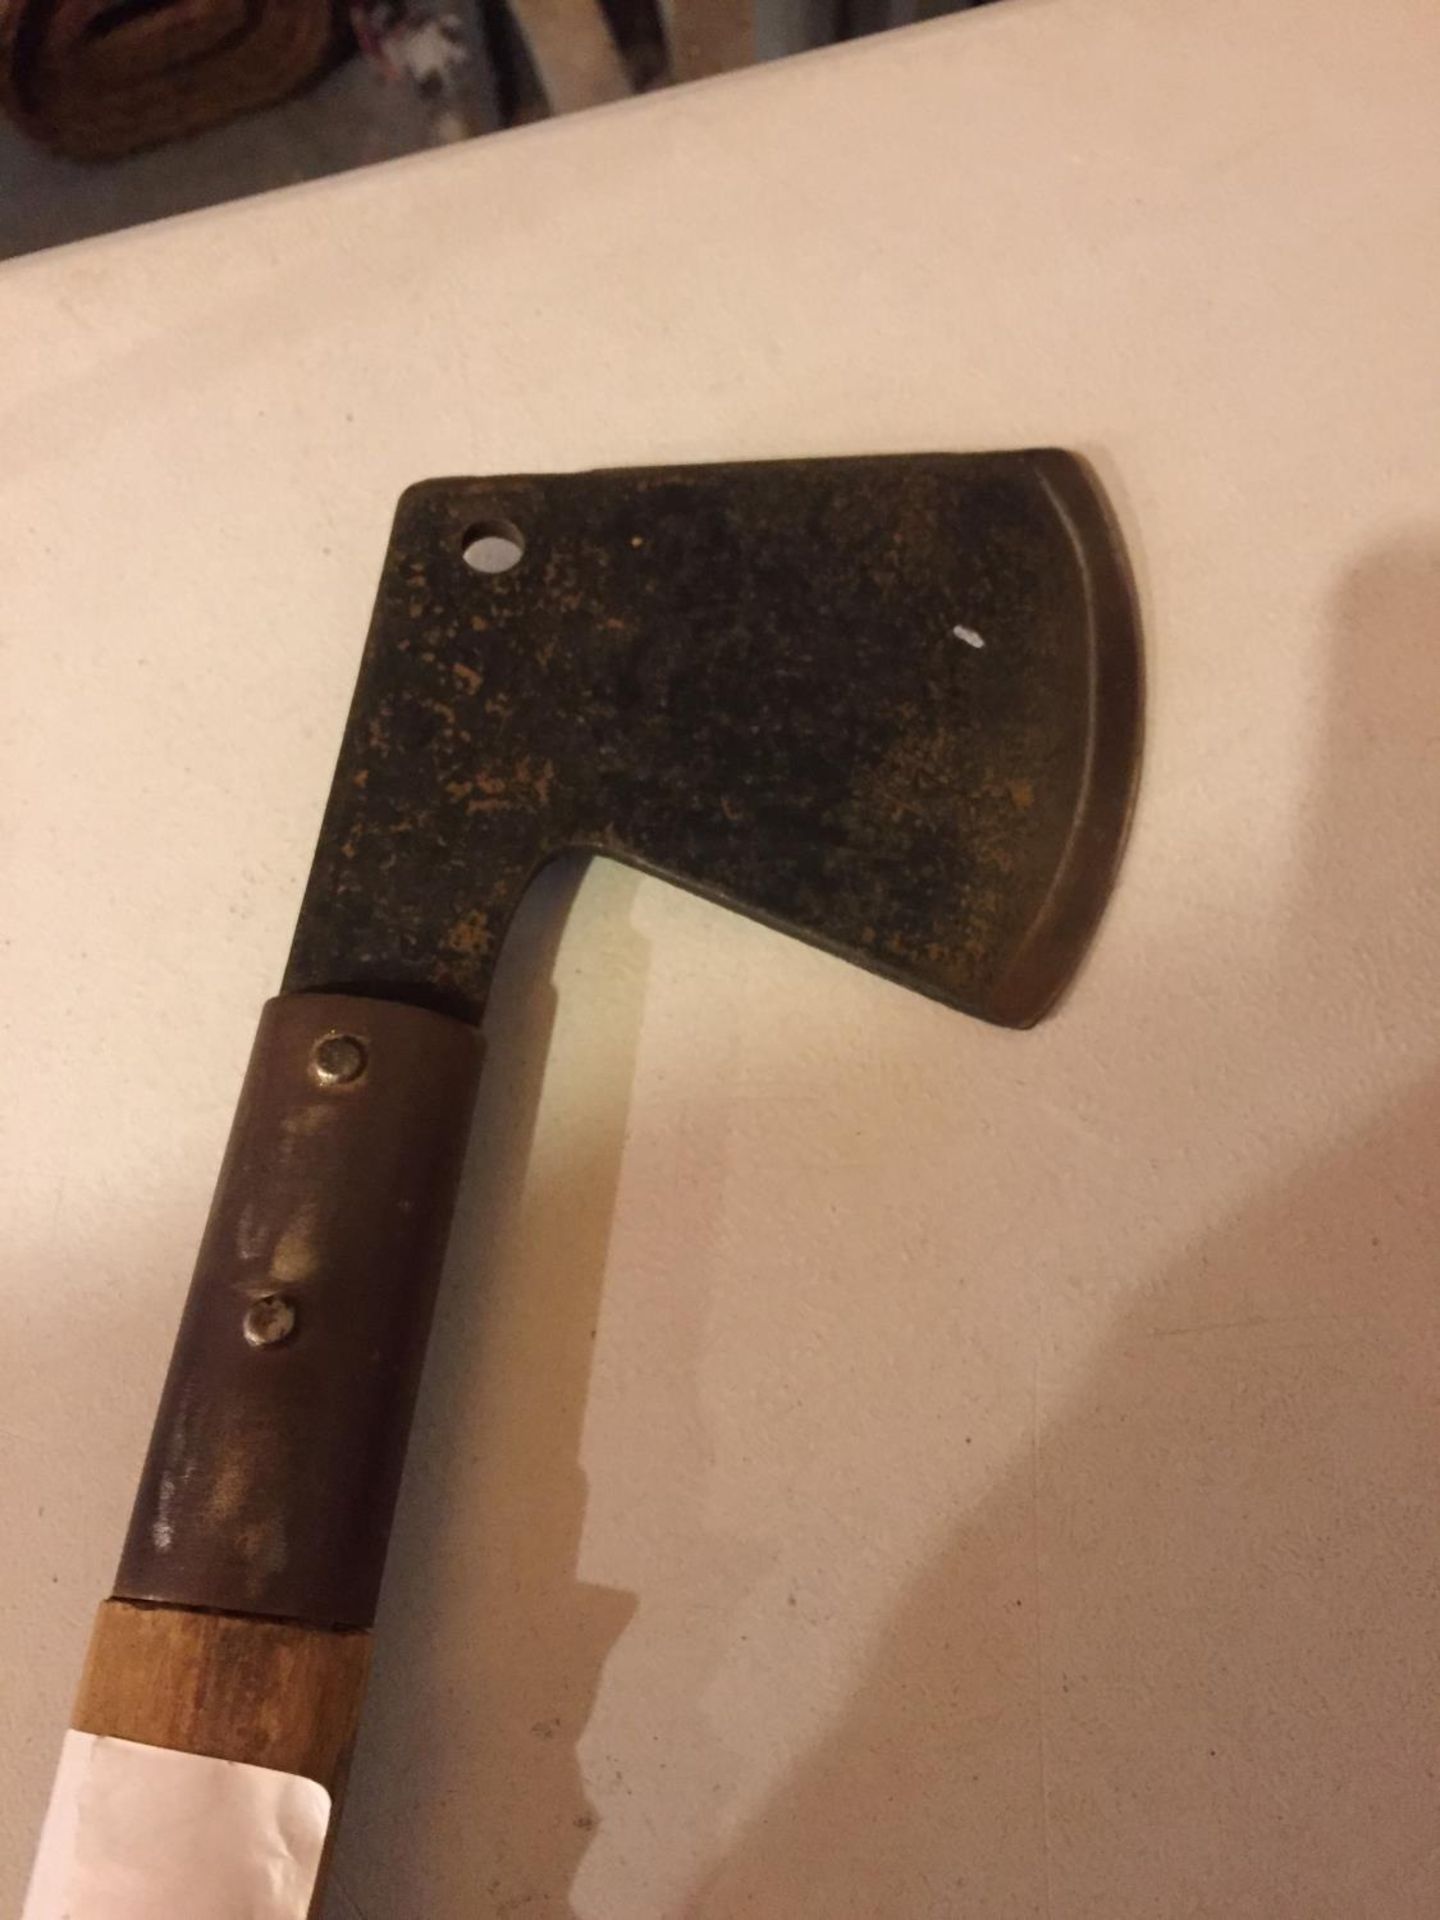 A KEENCUT MEAT CLEAVER - Image 3 of 3